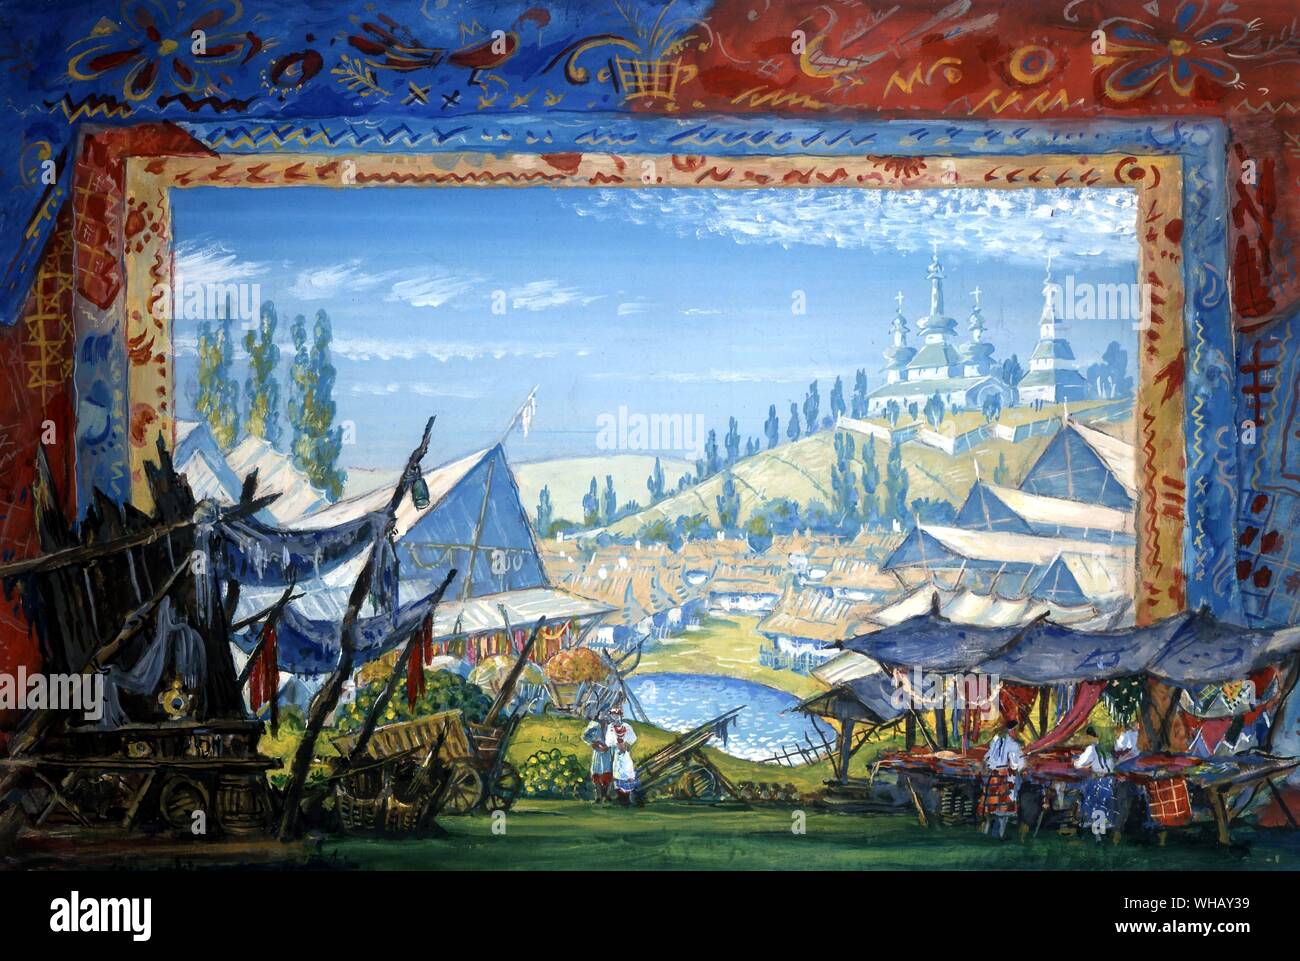 Opera Design by Mstislav Dobuzhinsky (1875-1957) for Mussorgsky's opera Sorochintsy Fair produced by Michael Chekhov with choreography by George Balanchine, (Russian- American). Opera, page 110-111. Stock Photo